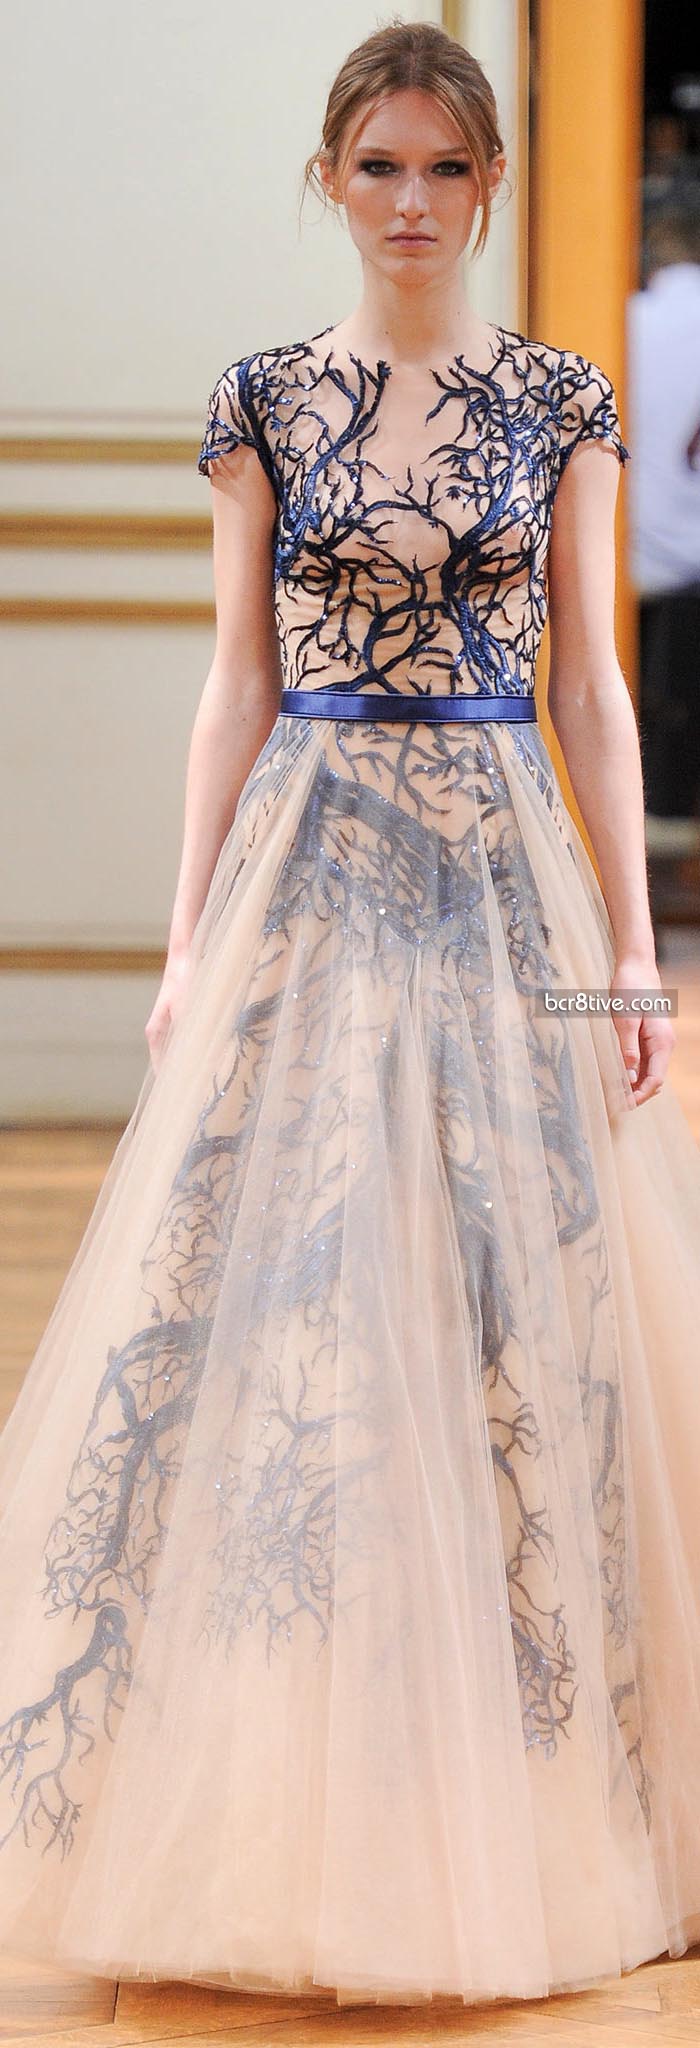 Zuhair Murad Fall Winter 2013-14 Haute Couture Collection